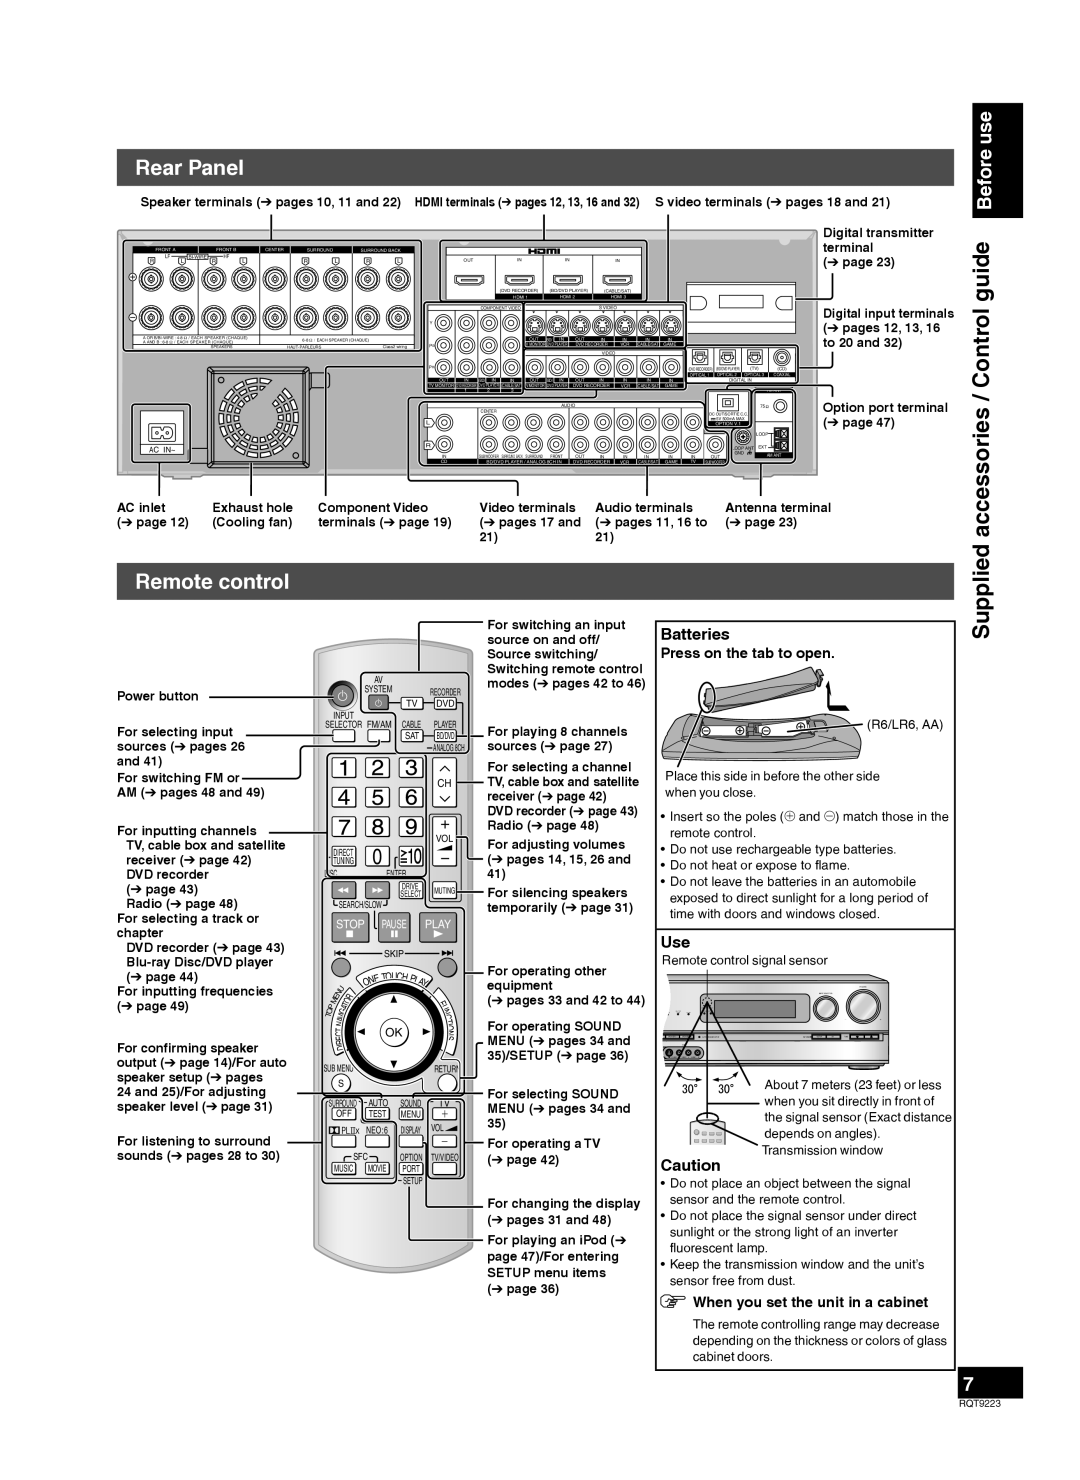 Panasonic H0608VC0, RQT9223-Y warranty Supplied, Rear Panel, accessories / Control guide, Remote control 